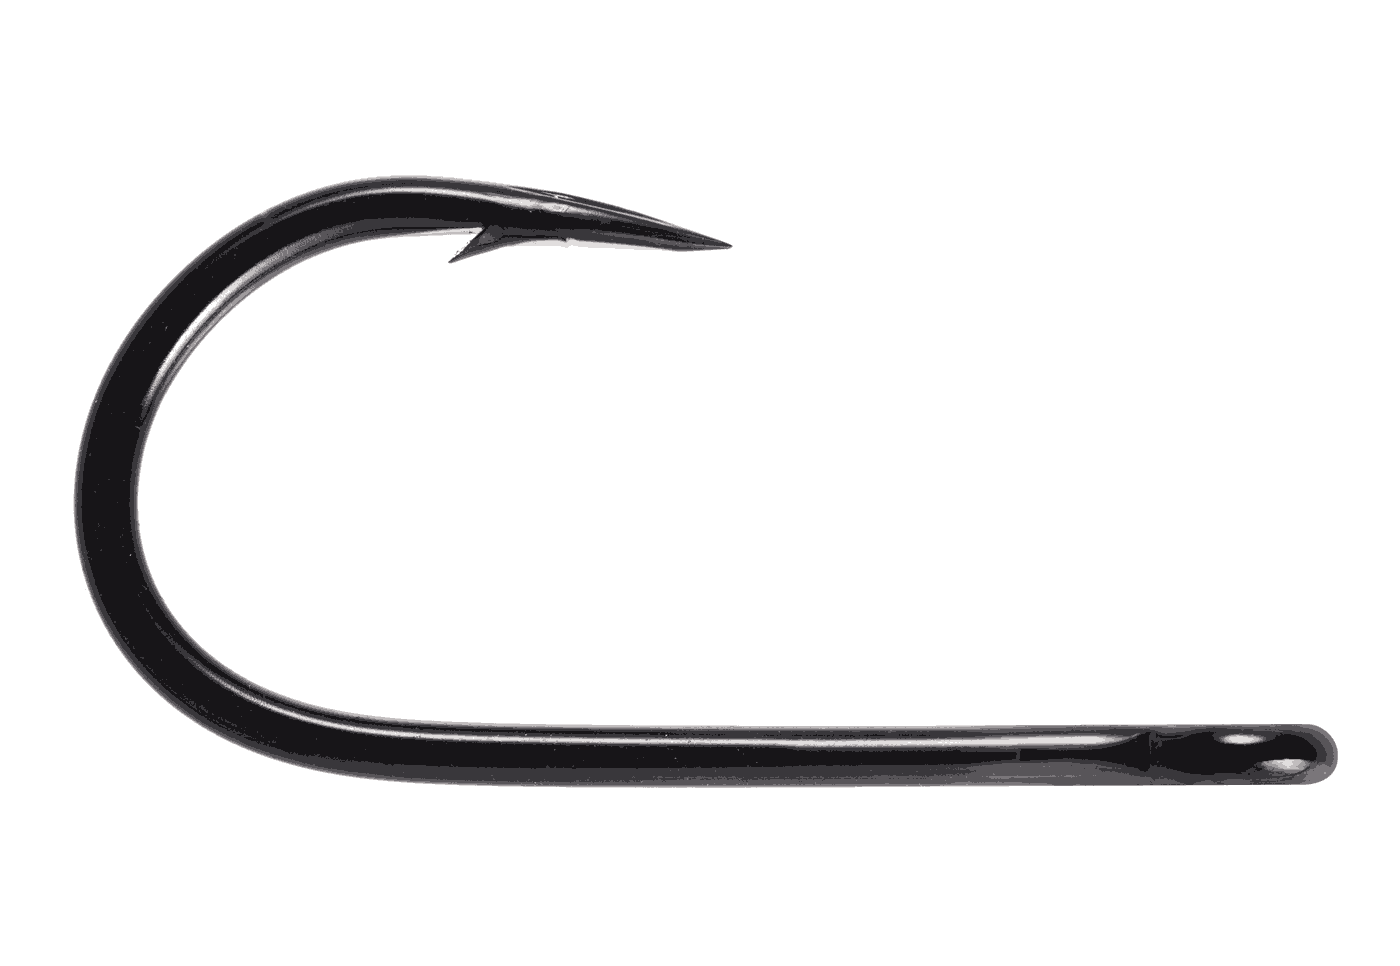 Free Post OWNER 5134-1882 Jobu Big Game Cutting Point Hook Size 8/0 Pack of 4 